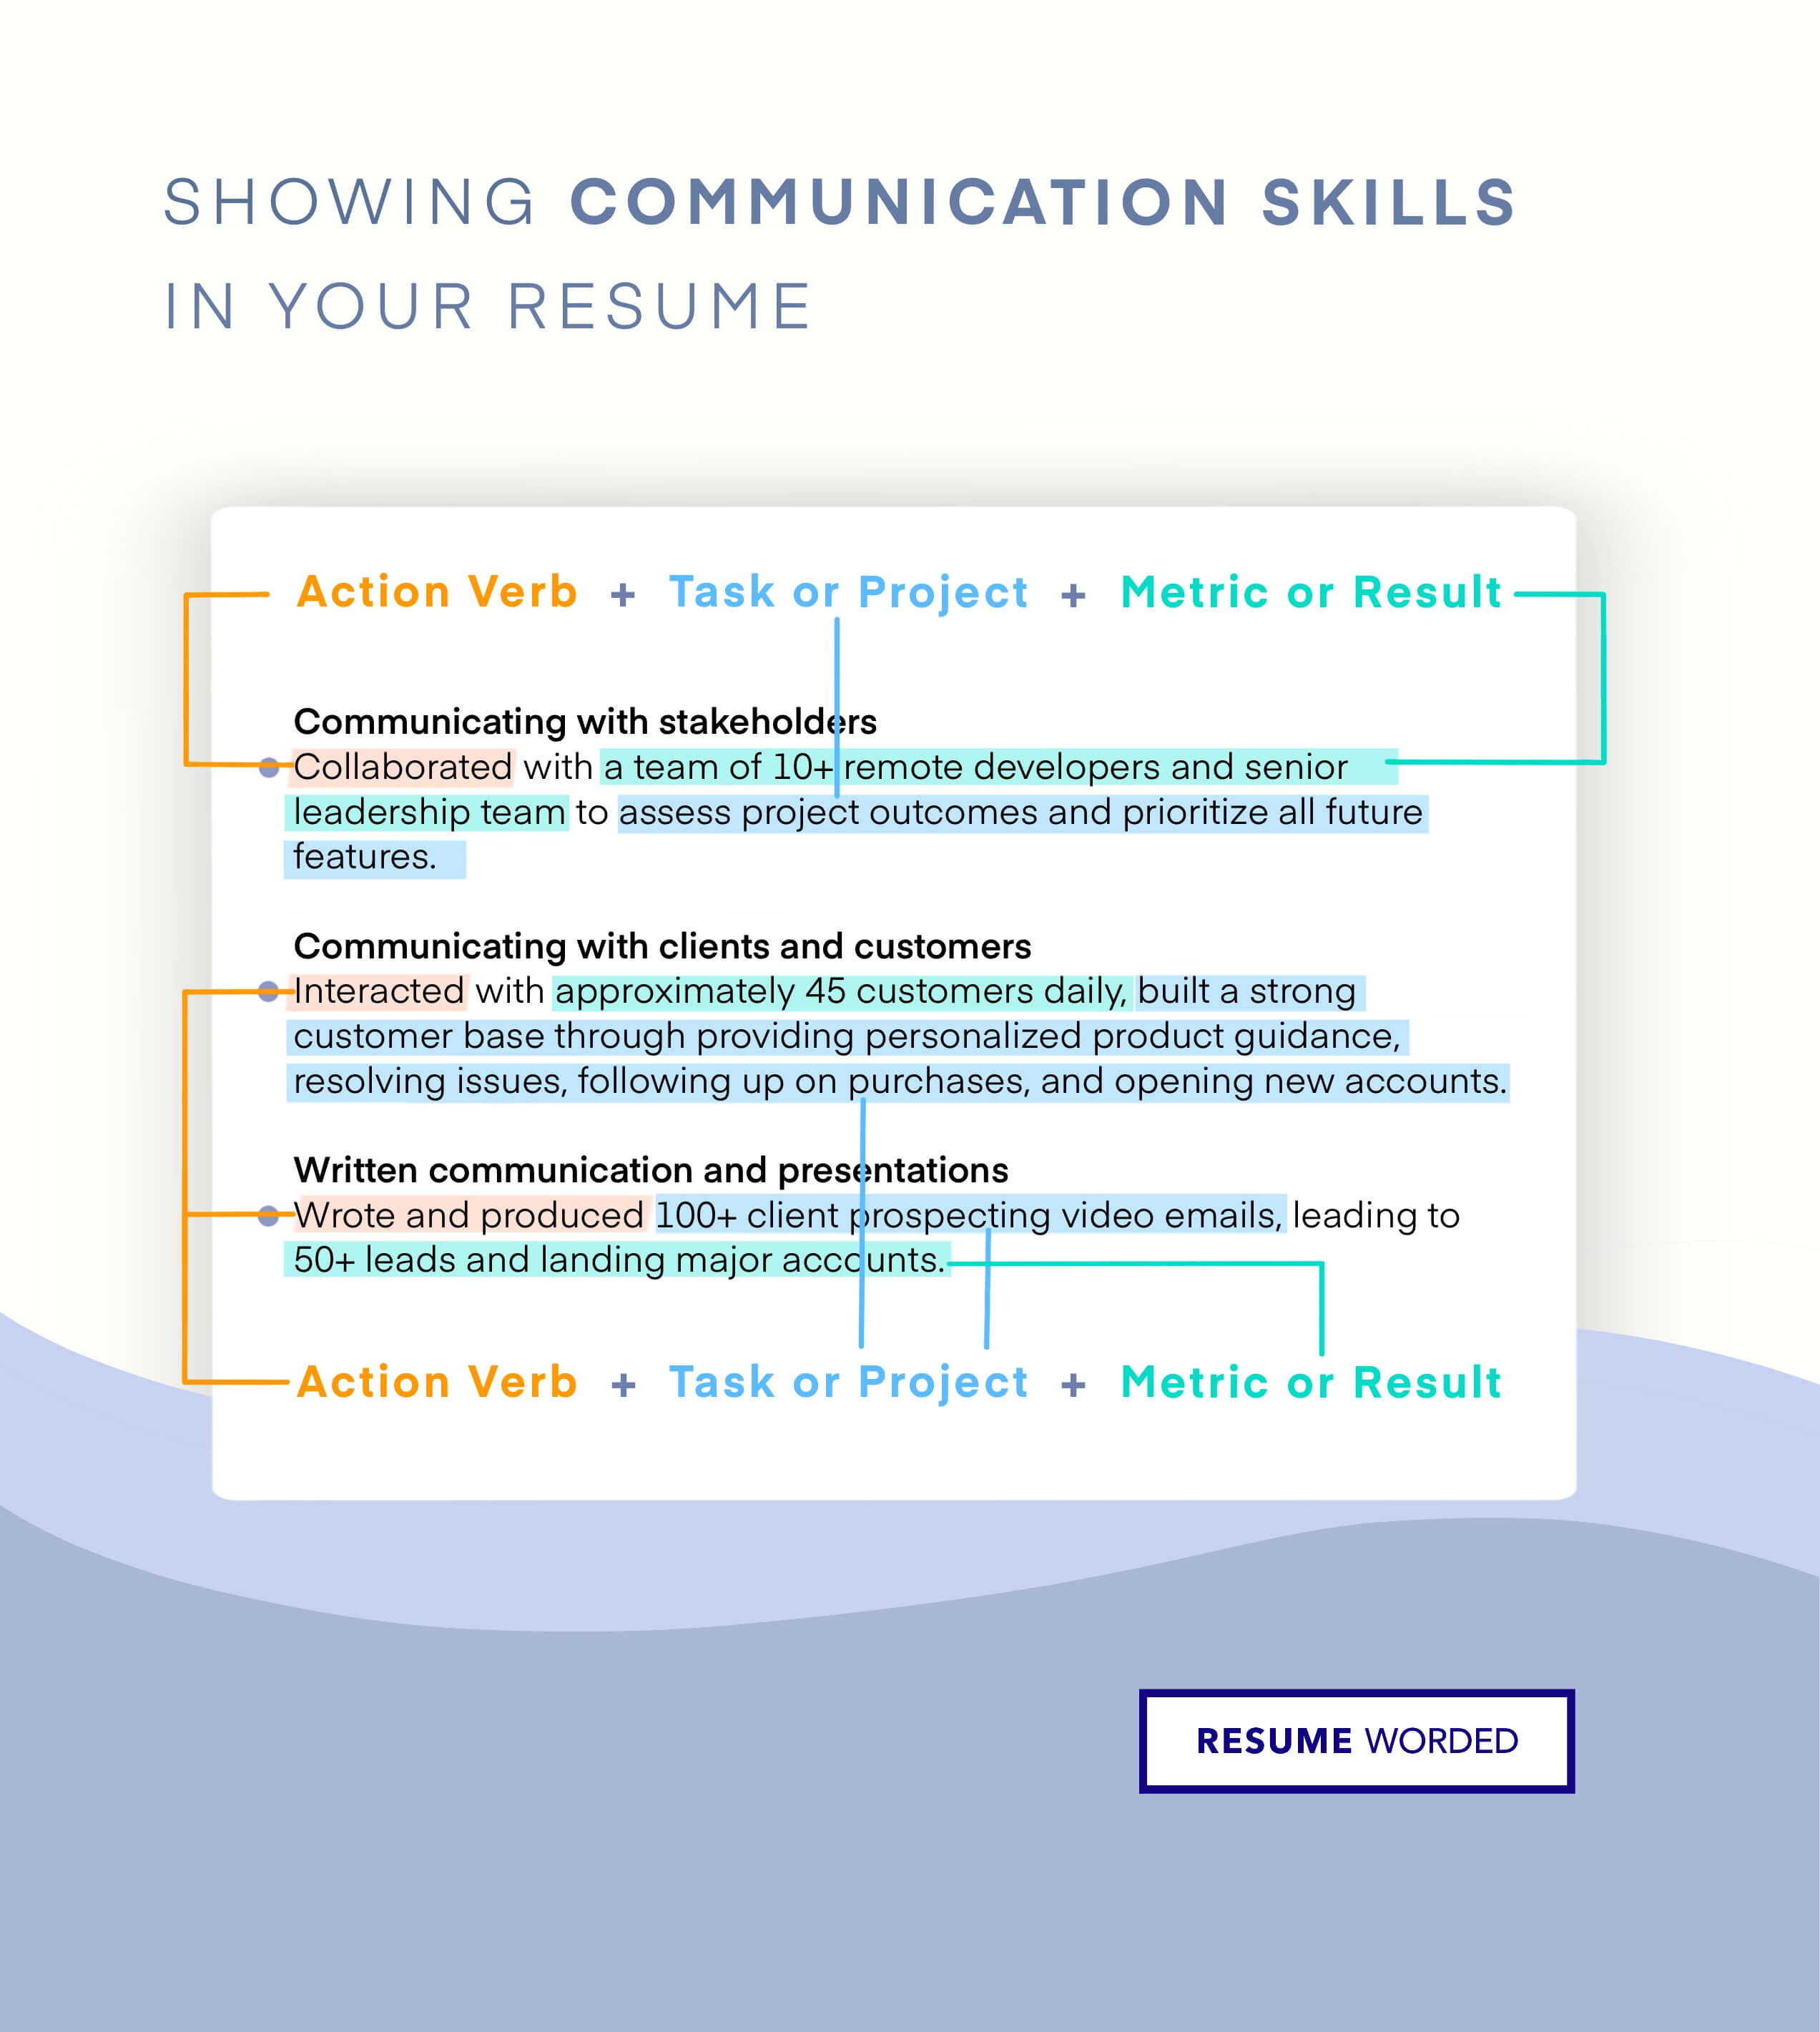 Demonstrate Your Communication Skills - Equity Research Associate CV